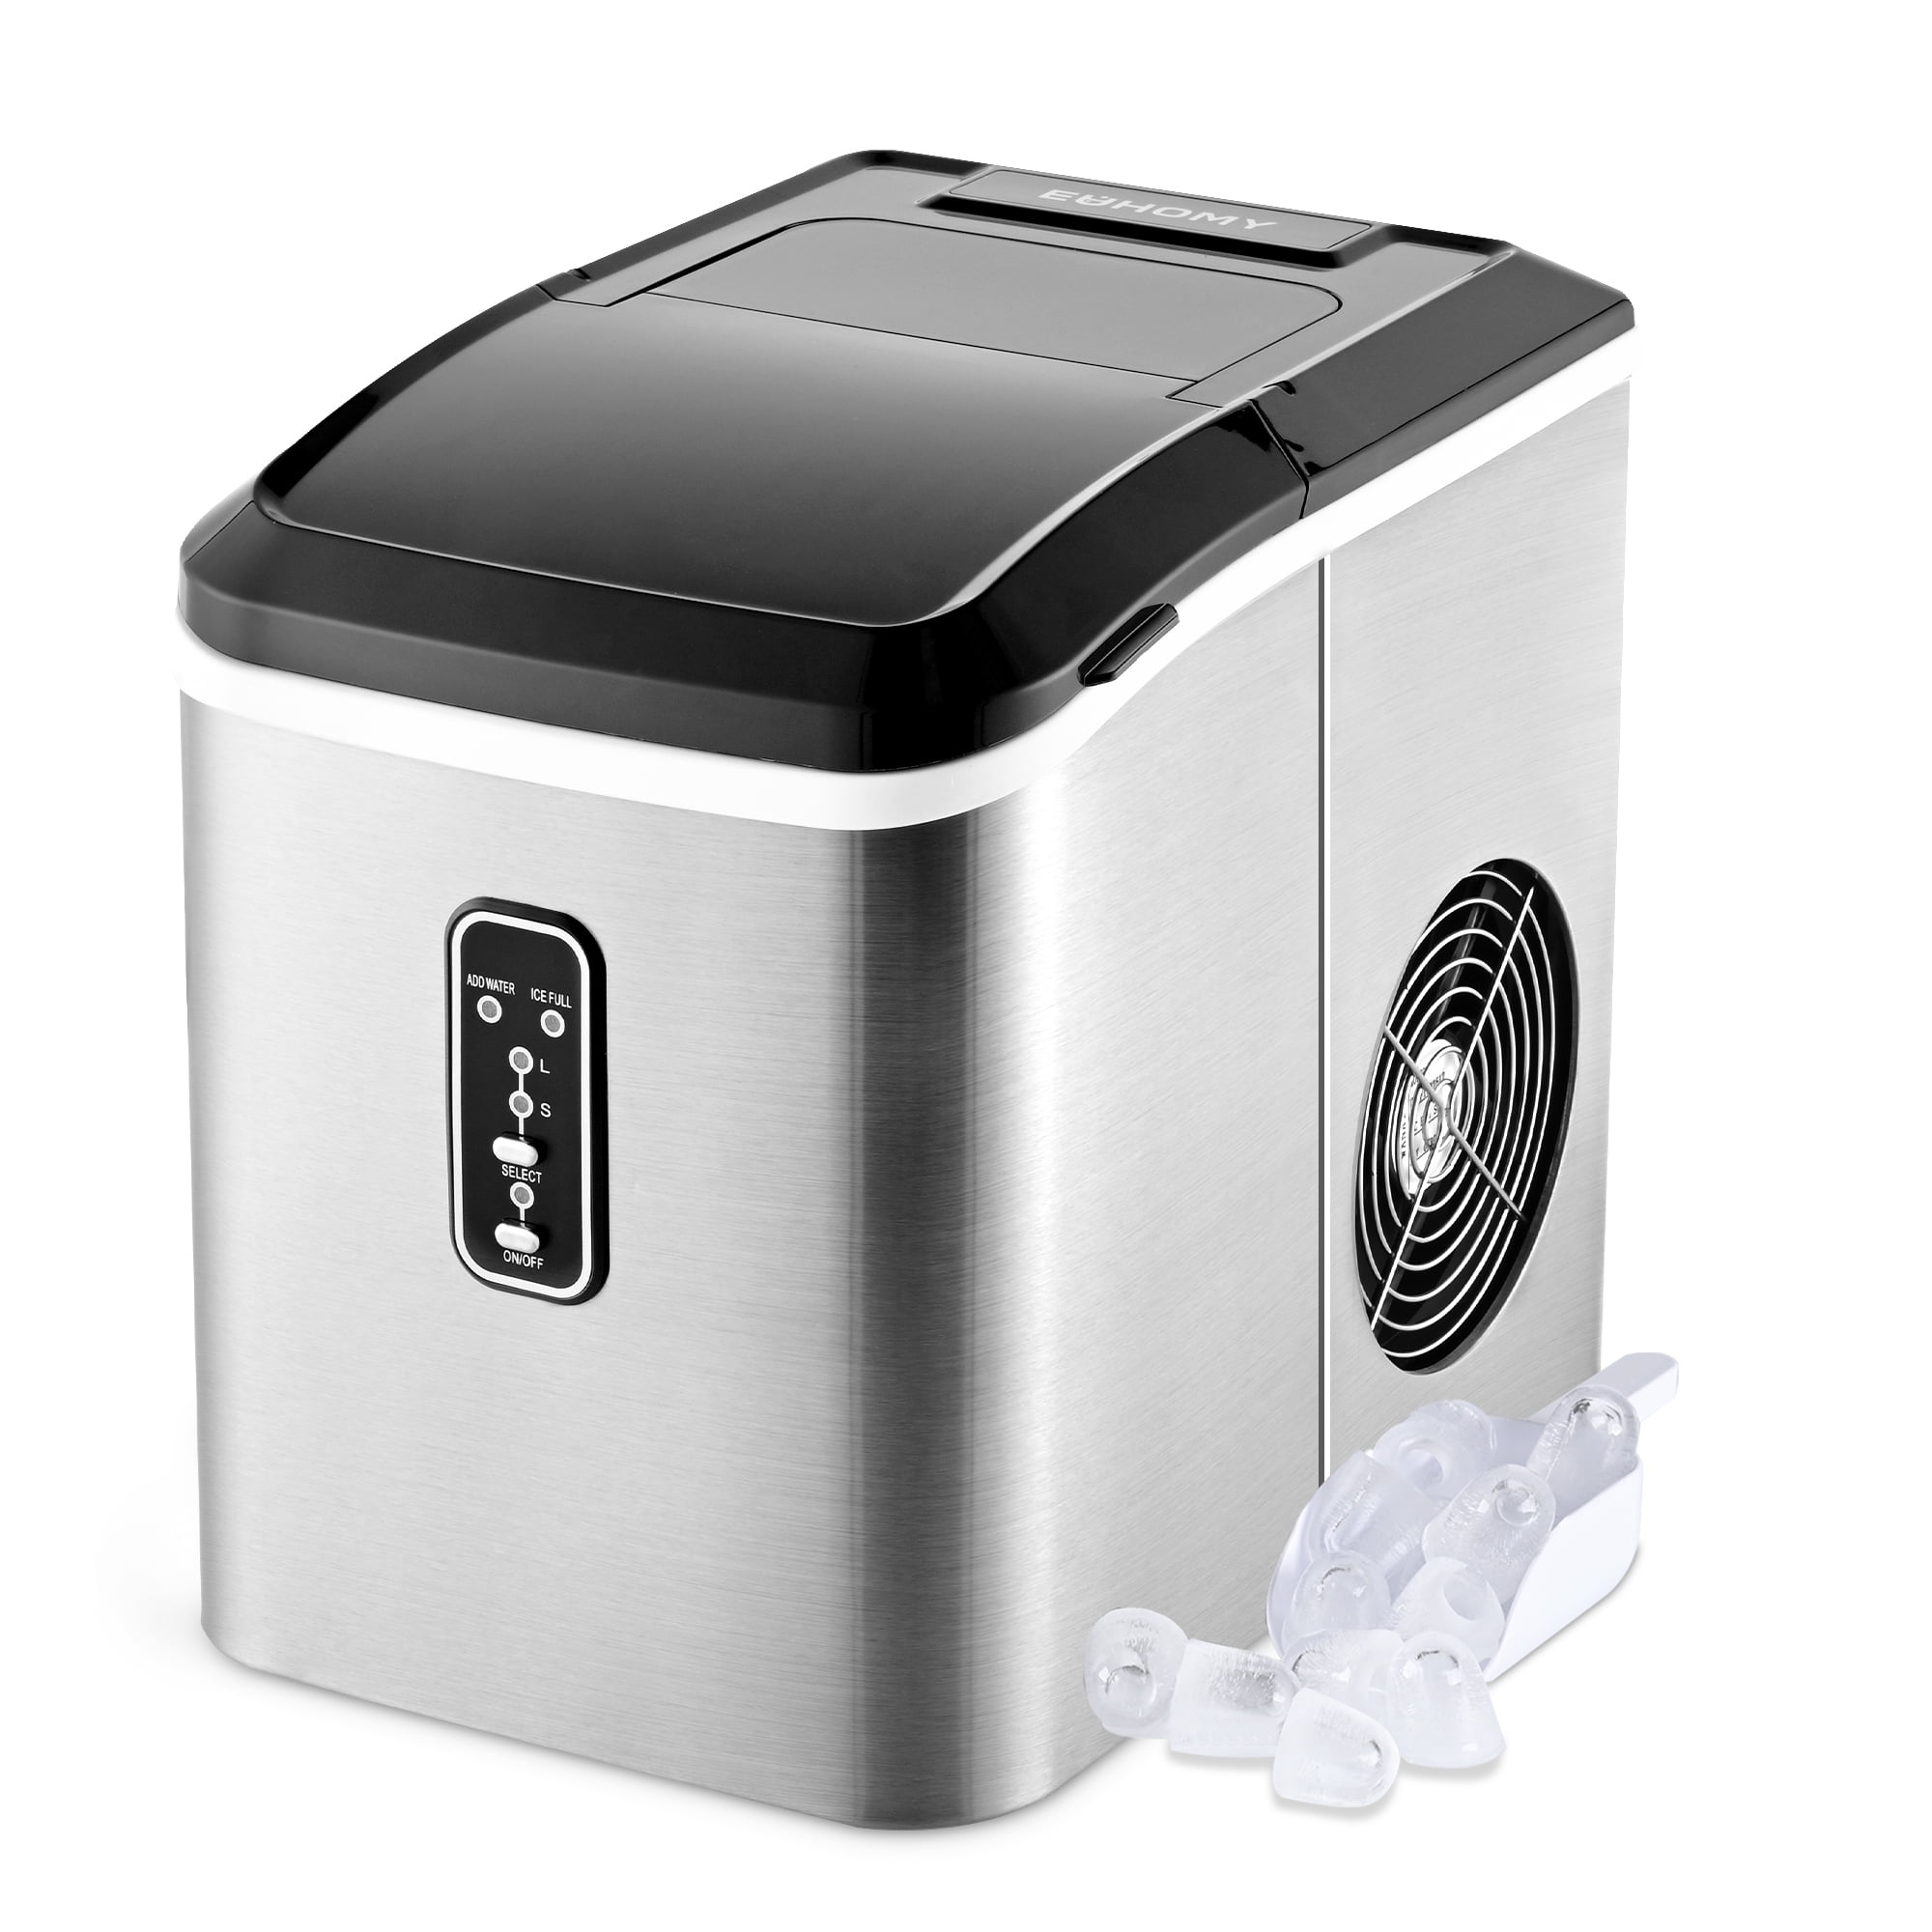 Euhomy 34Lbs/24h Countertop Ice Maker Machine - Fully Flip Cover Cleaning, 2 Sizes Ice, 7 Mins 9 Bullet Ice, Portable Ice Maker with Basket and